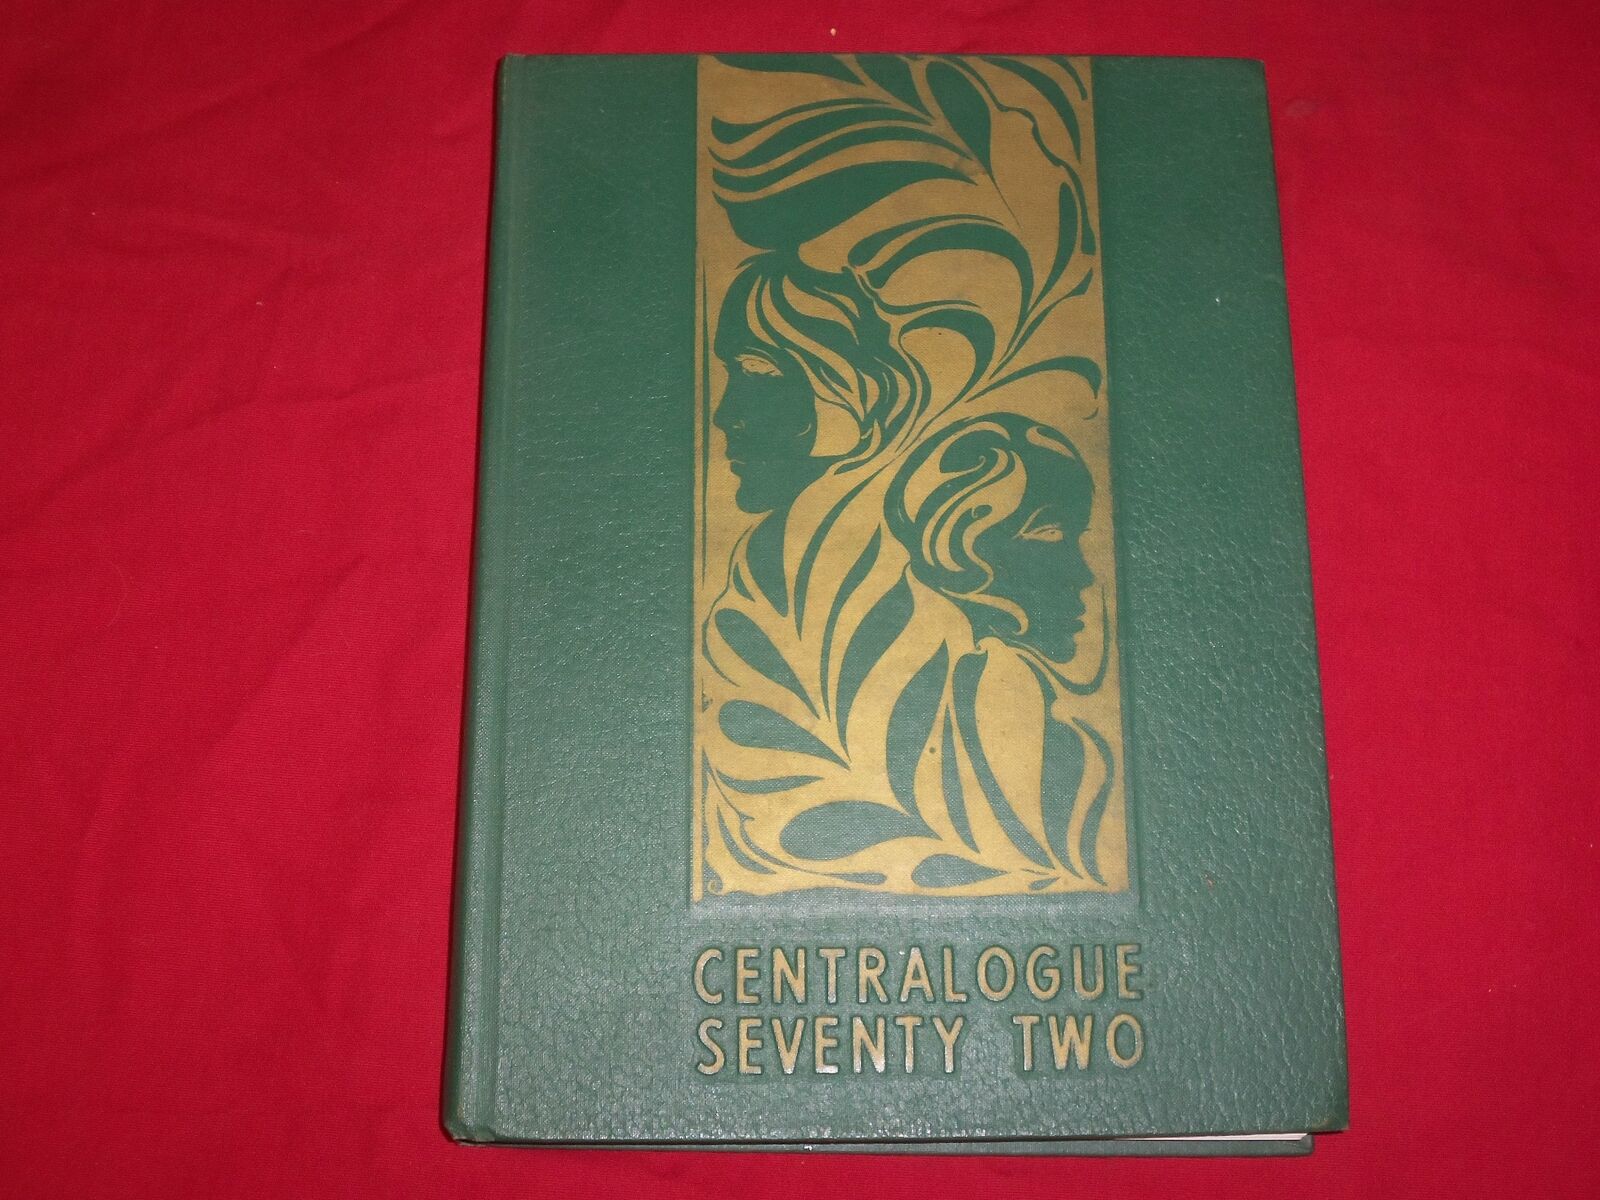 1972 CENTRALOGUE HOPEWELL VALLEY CENTRAL HS YEARBOOK - PENNINGTON, NJ - YB 1796